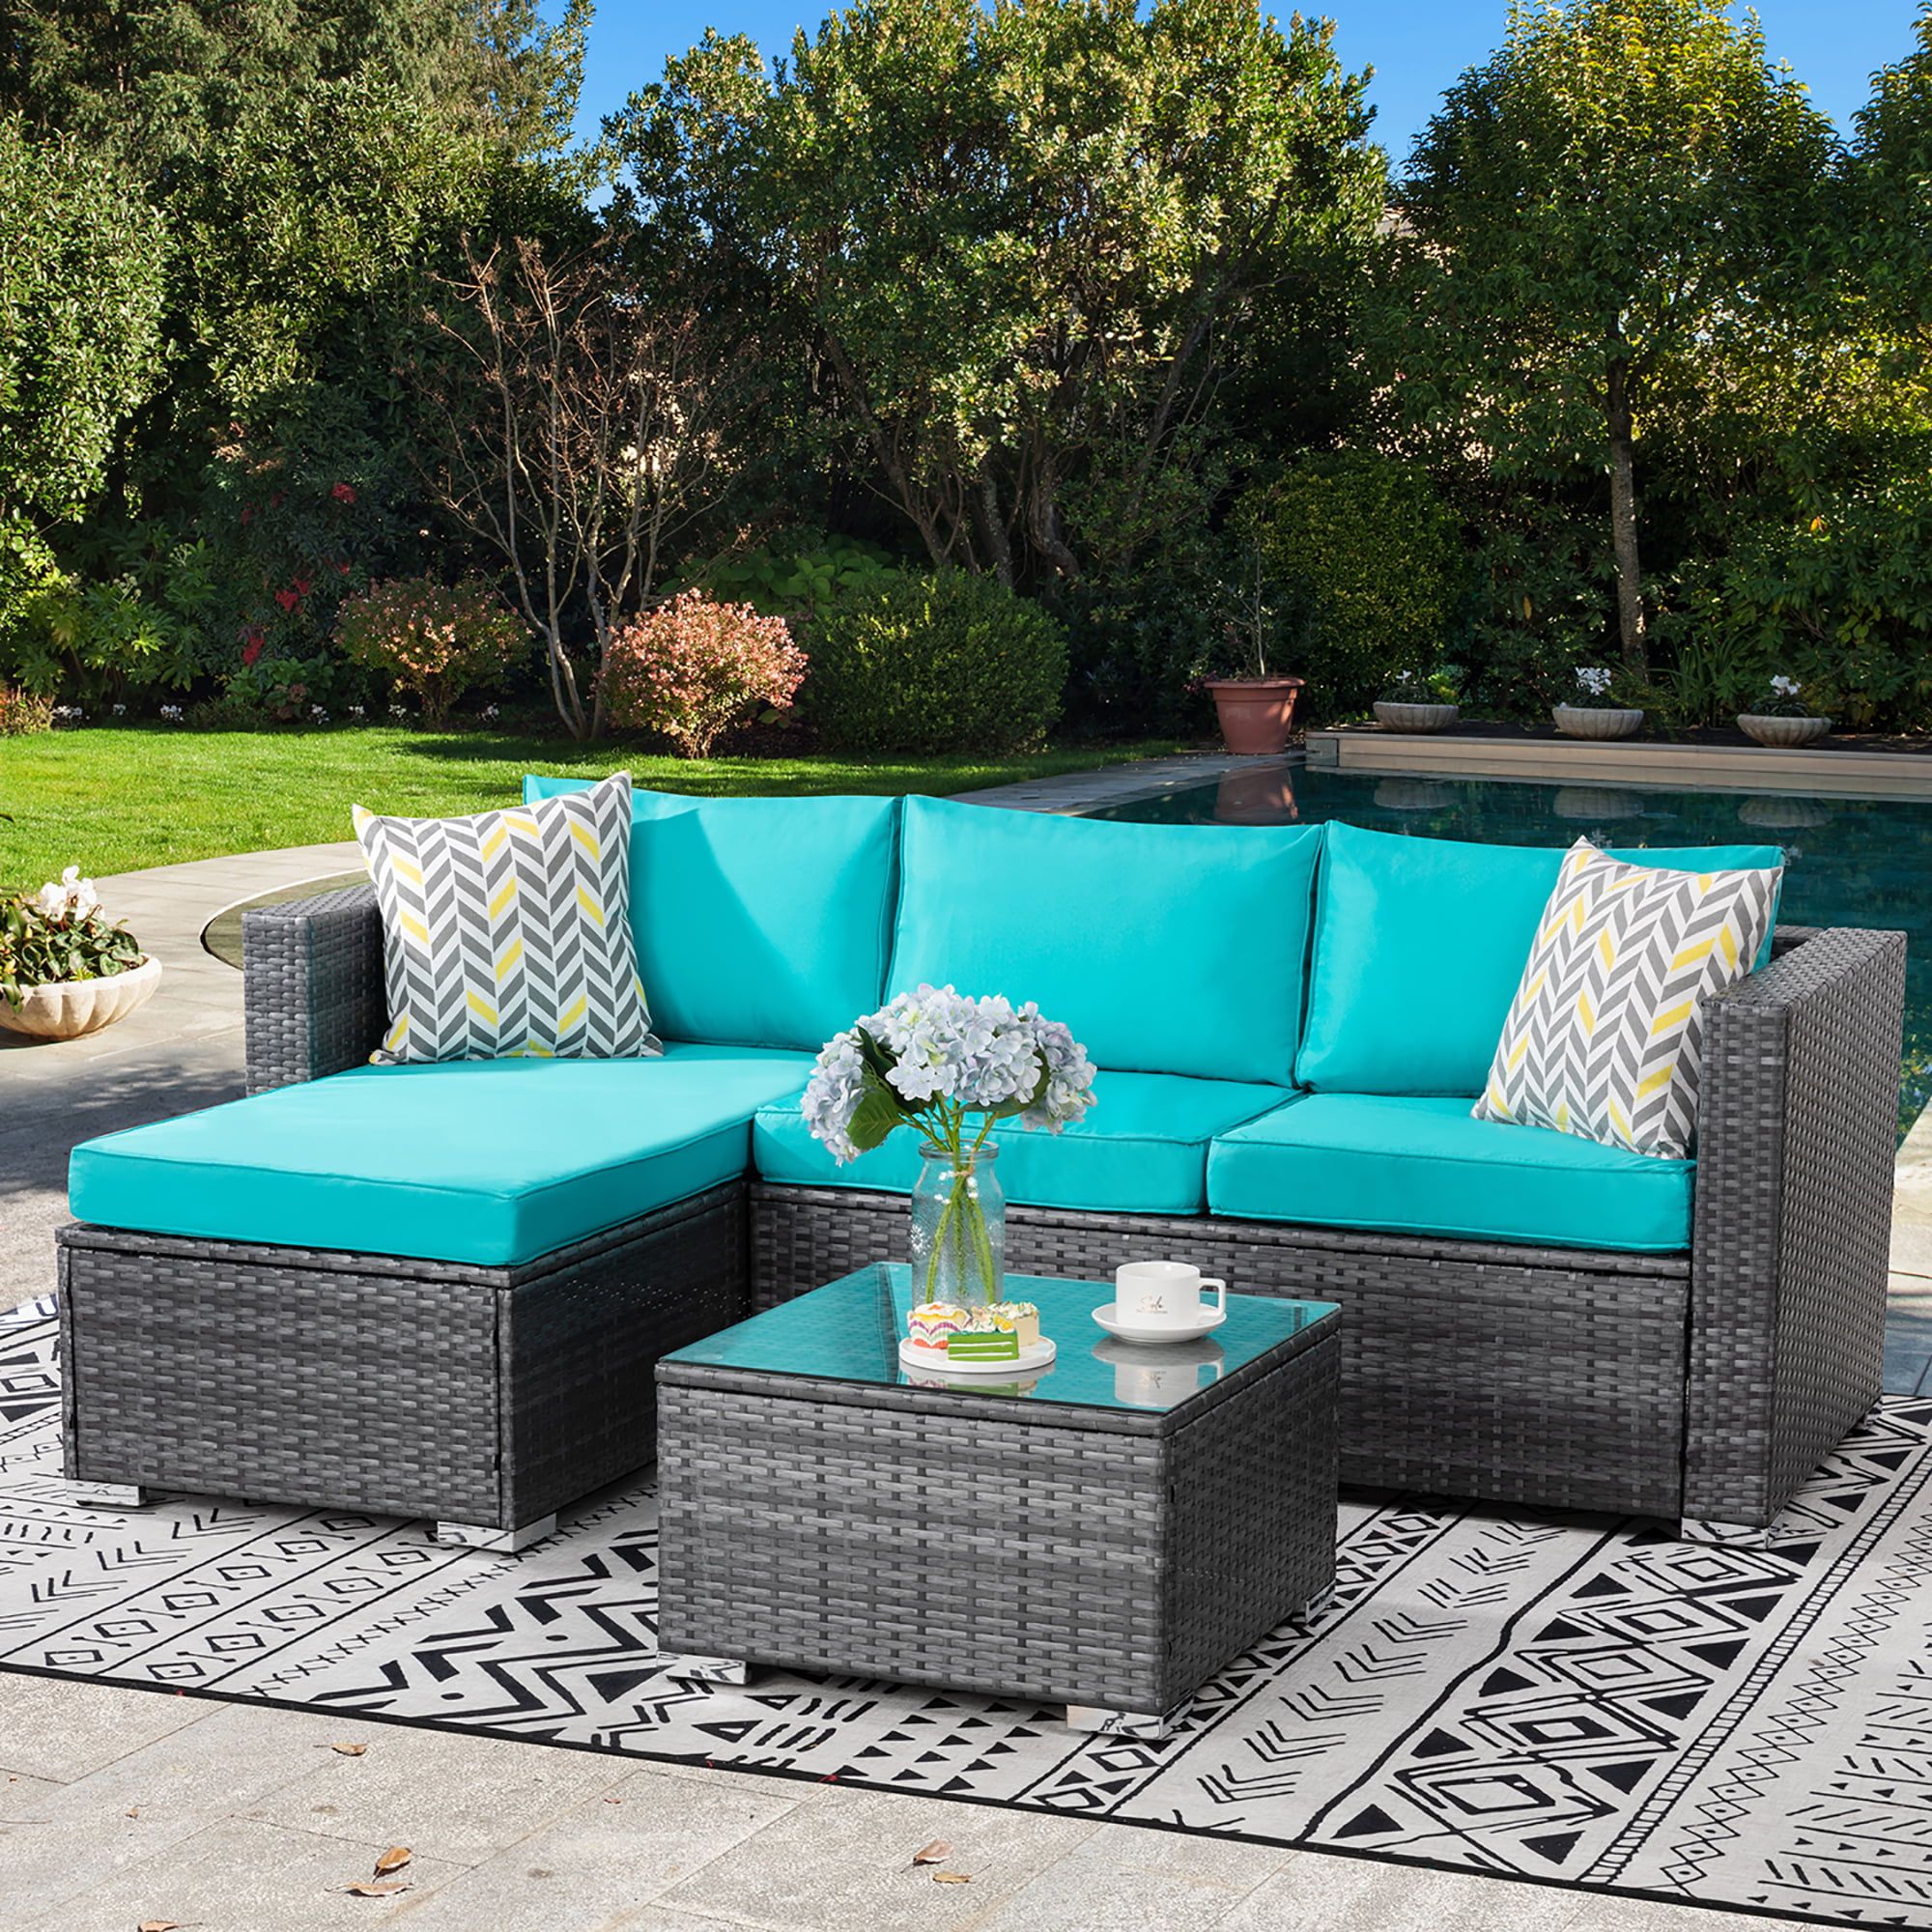 Walsunny 3 Piece Blue Outdoor Furniture Sectional Sofa Patio Set With  Silver Gray Rattan Wicker – Walmart Pertaining To Patio Rattan Wicker Furniture (View 5 of 15)